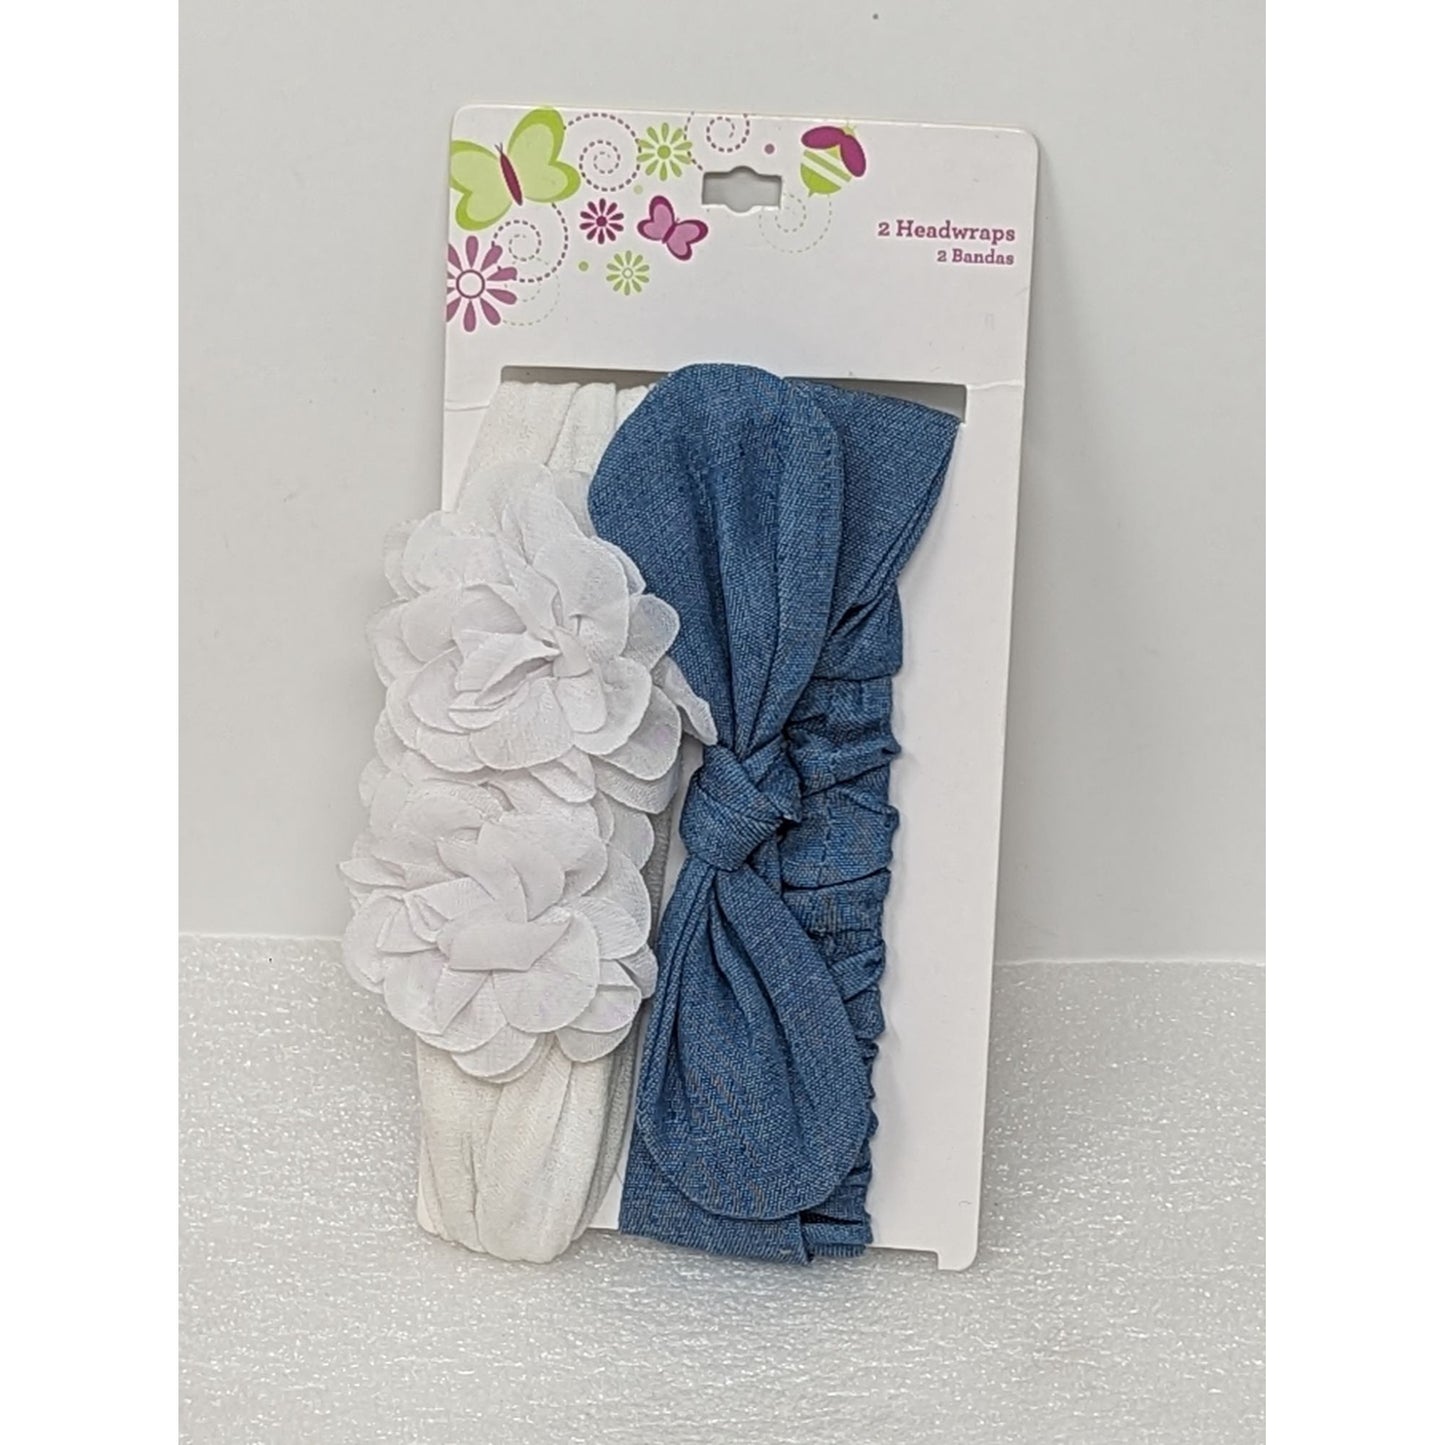 Pack of 2 Headwraps Headbands Blue & White